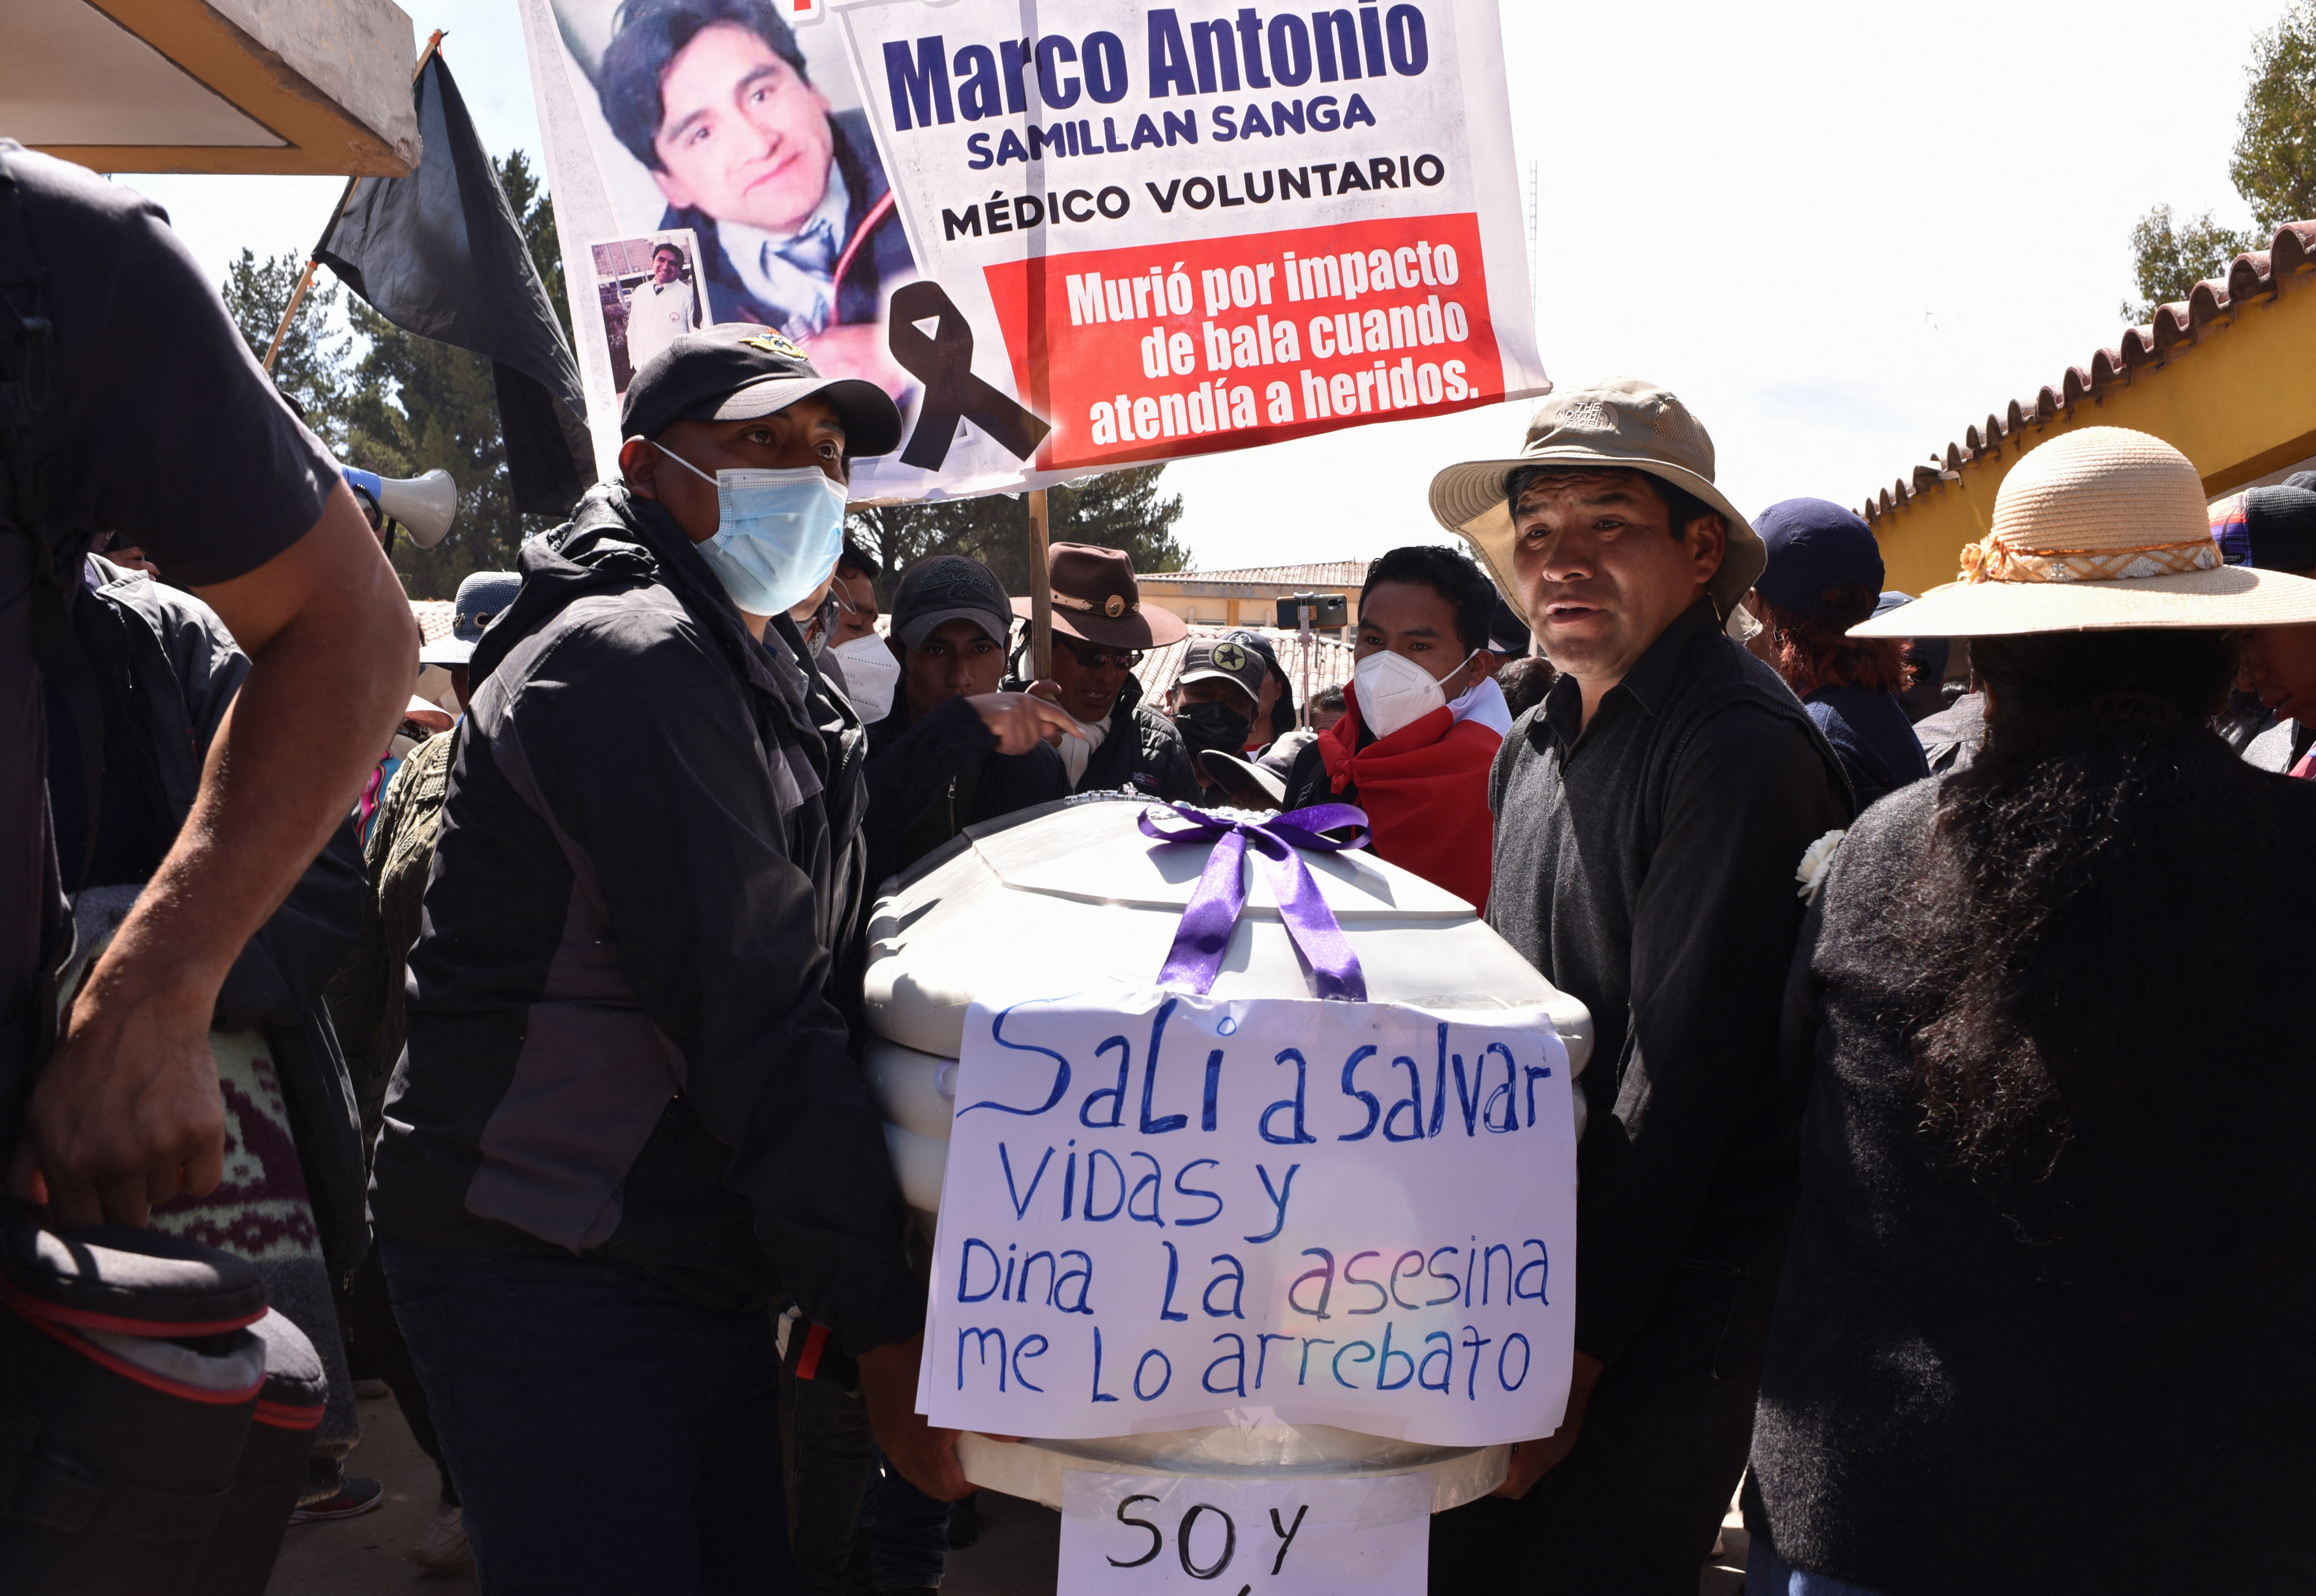 People carry the coffin of a man, who died in violent clashes earlier this week, ignited by the ouster of leftist President Pedro Castillo, in Juliaca, Peru January 11, 2023. The signs read "Marco Antonio, a volunteer doctor, was shot dead while treating the wounded," and "I went out to save lives and Dina, the assassin, took mine”, referring to current Peruvian President Dina Boluarte.  REUTERS/Pedro Anza NO RESALES. NO ARCHIVES